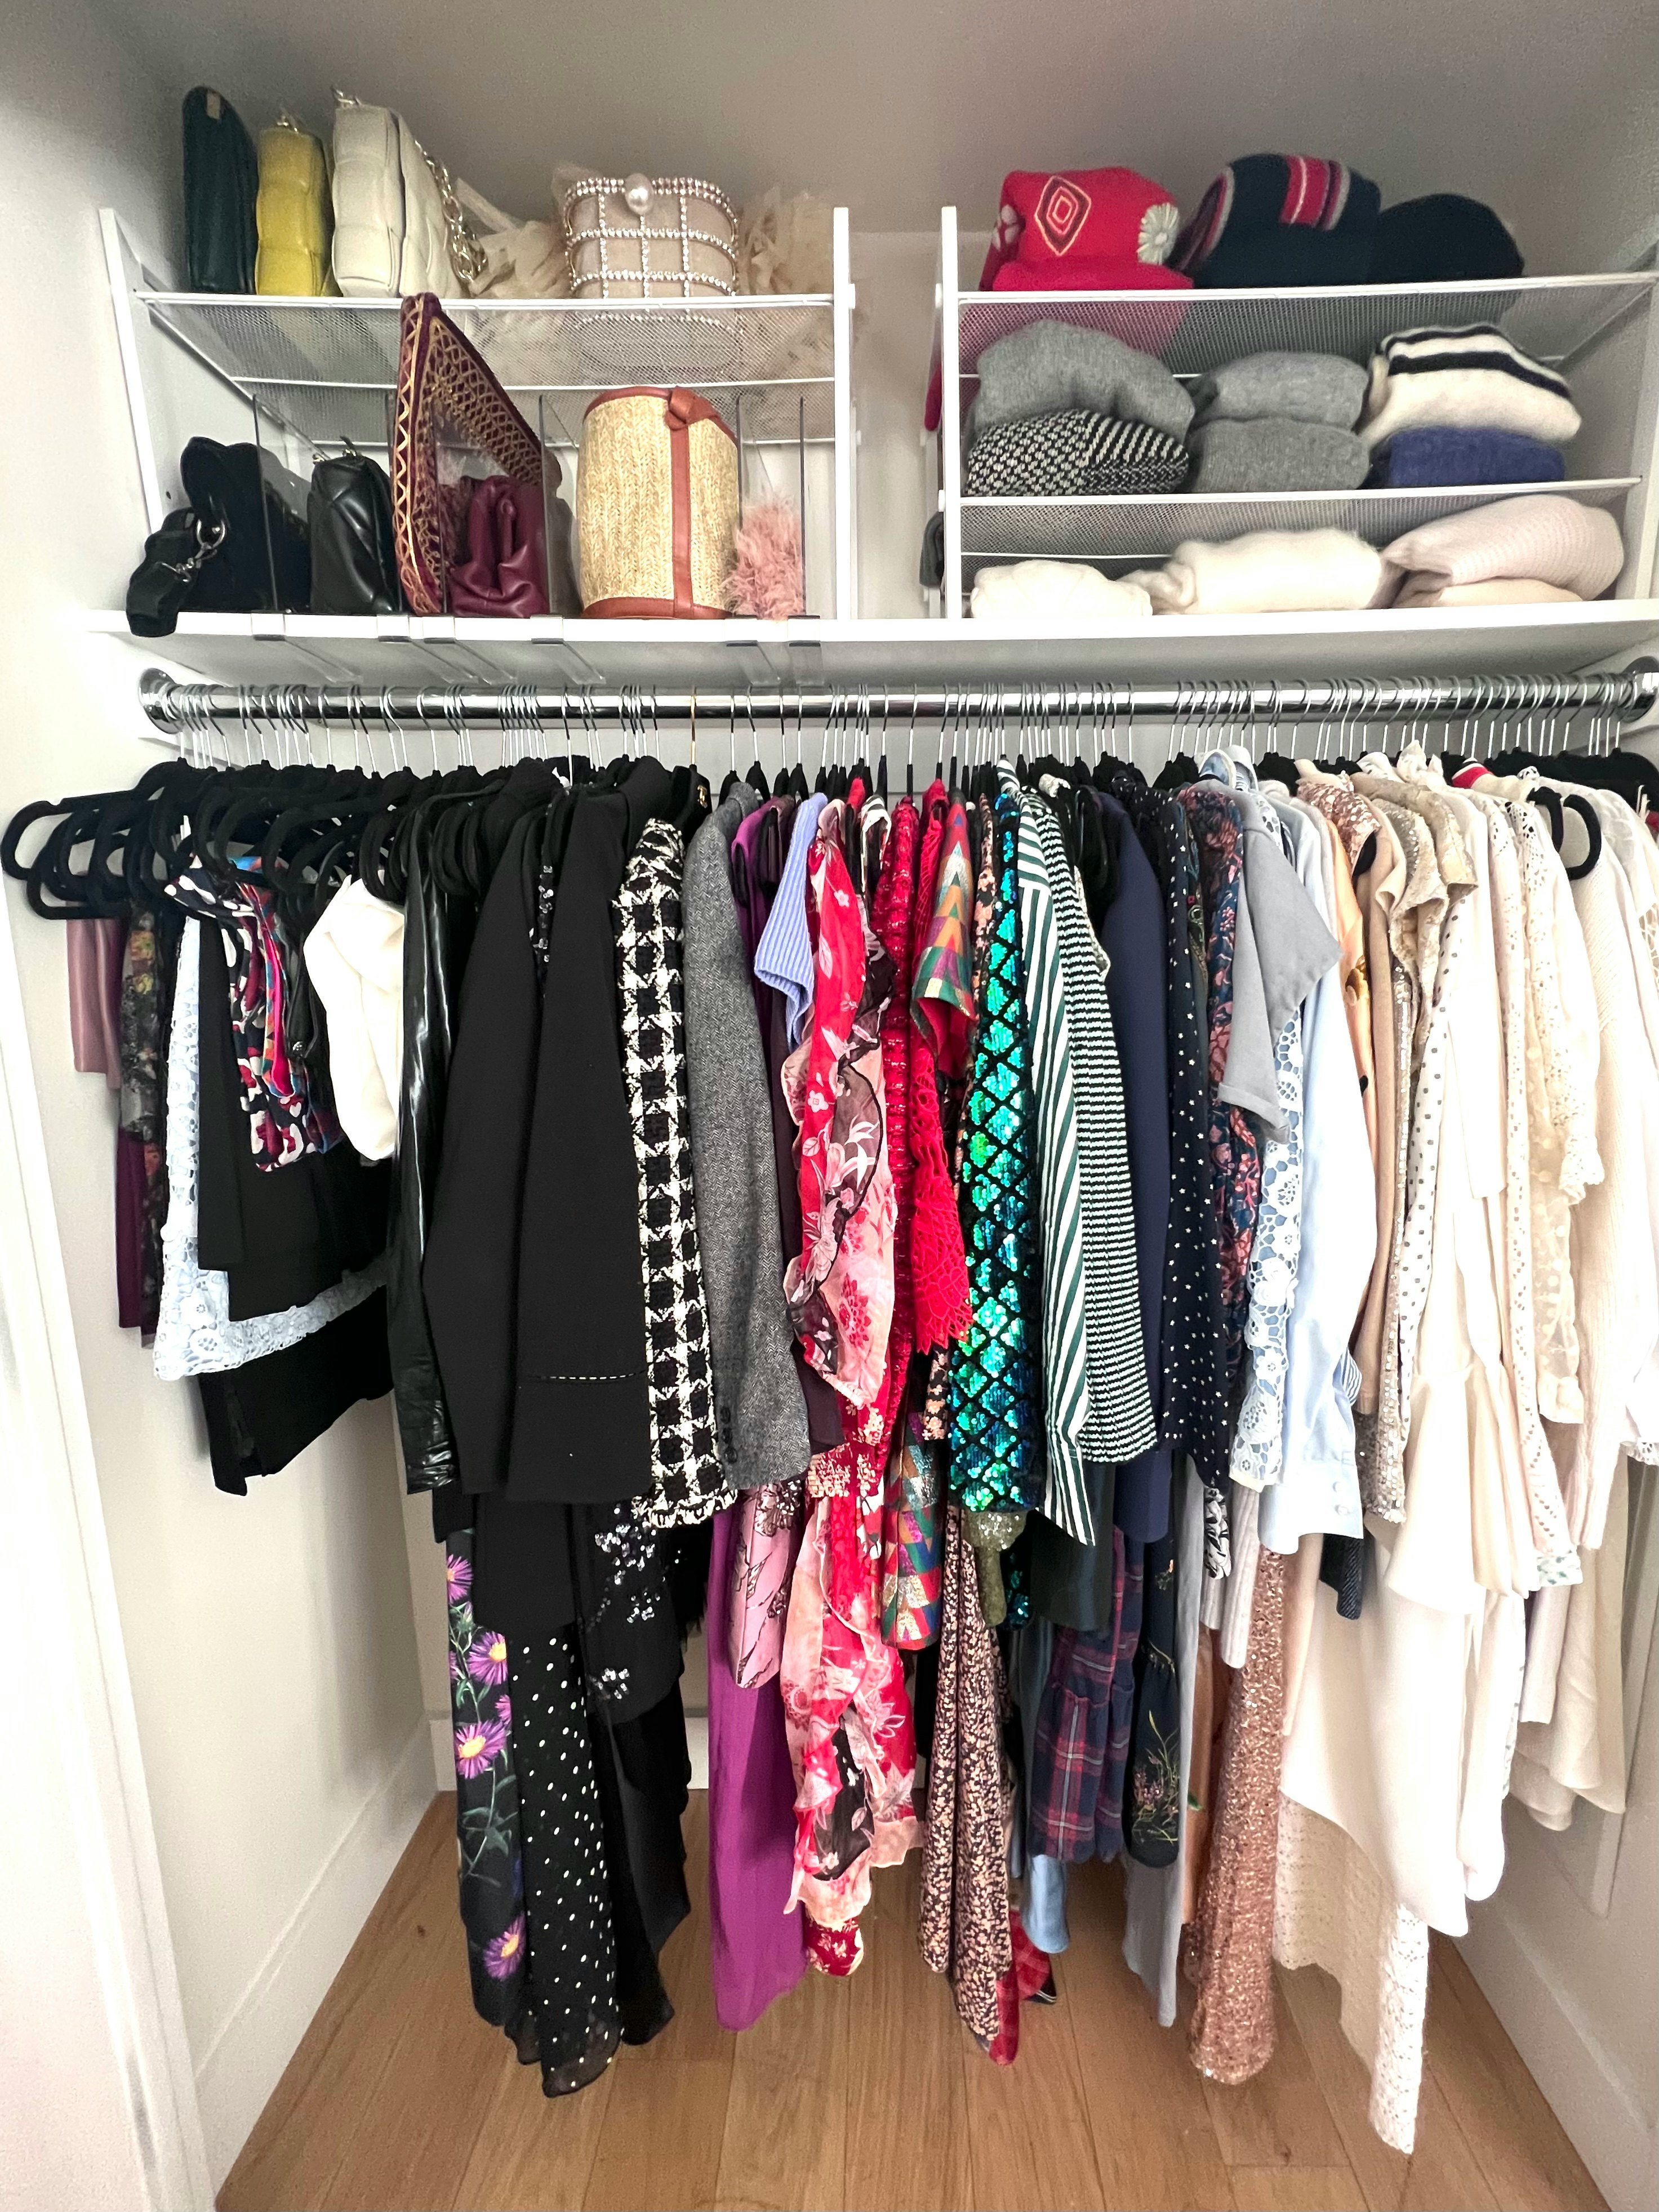 I Hired A Professional Home Organizer And Discovered A World Of Benefits